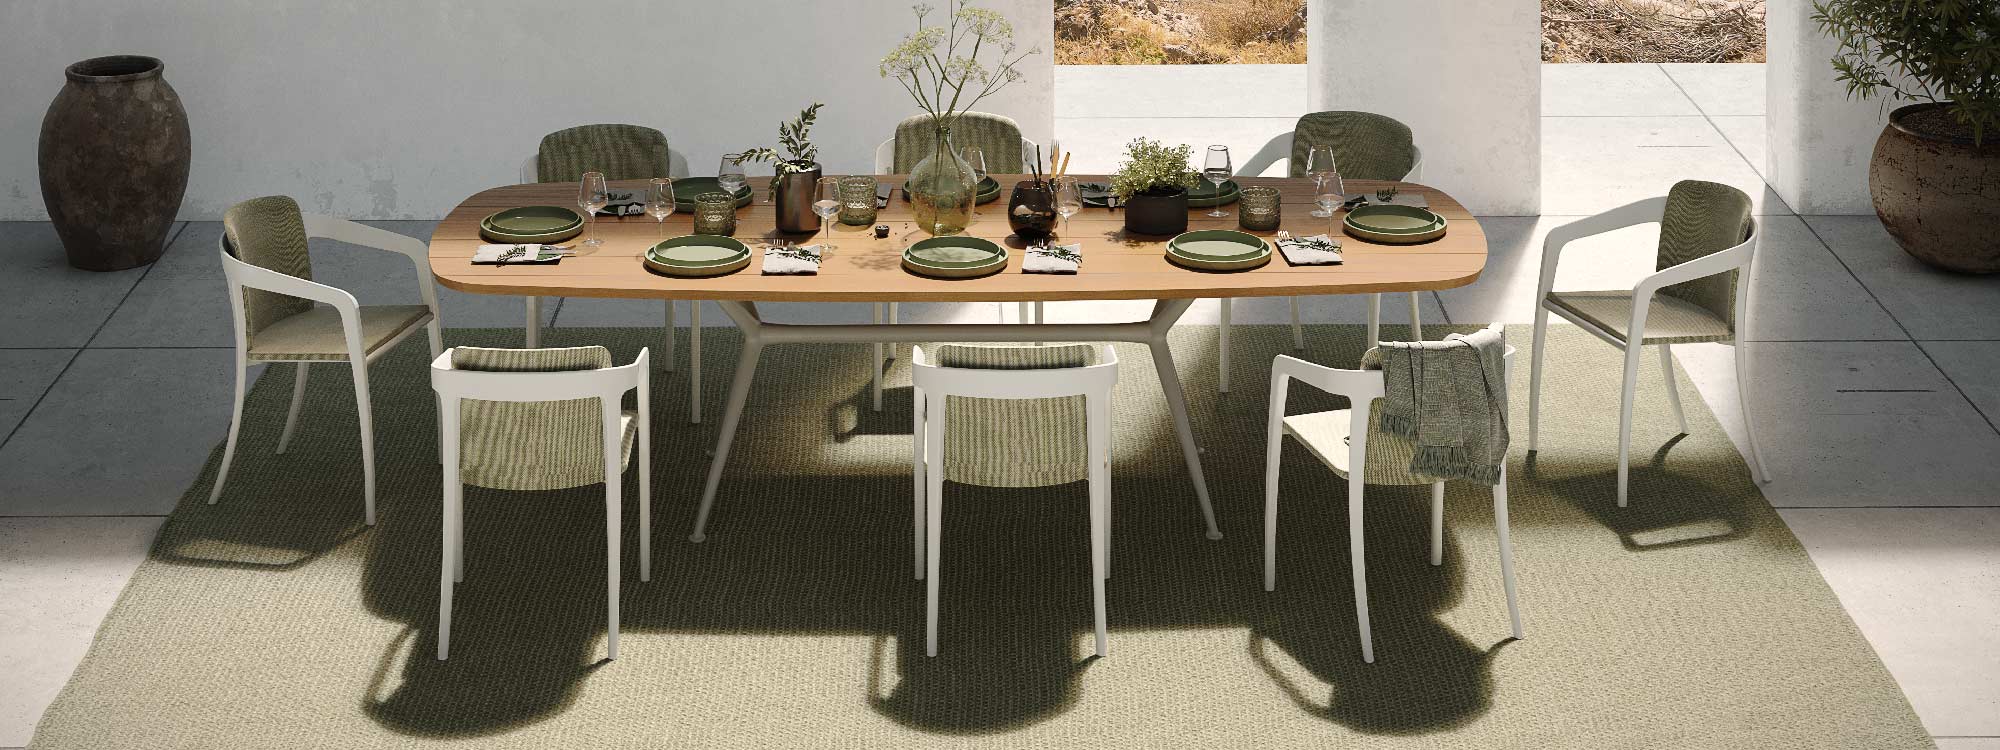 Image of Styletto white oval garden table with teak top, together with Jive white modern garden chairs by Royal Botania